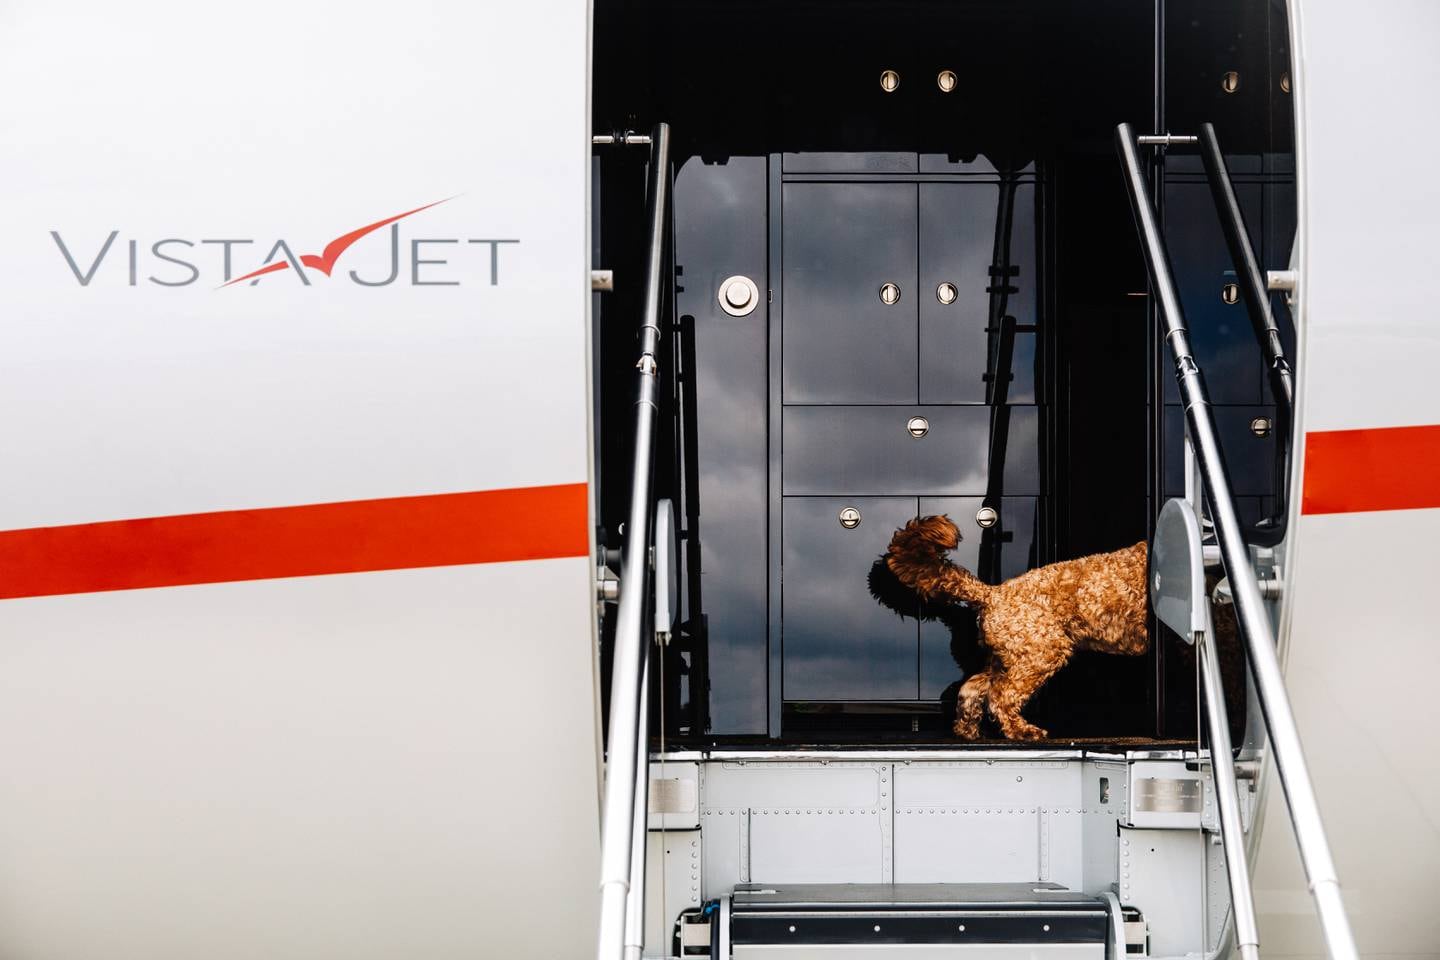 Flying with an animal can be complicated, due to varying regulations and restrictions around the world. Photo: VistaJet